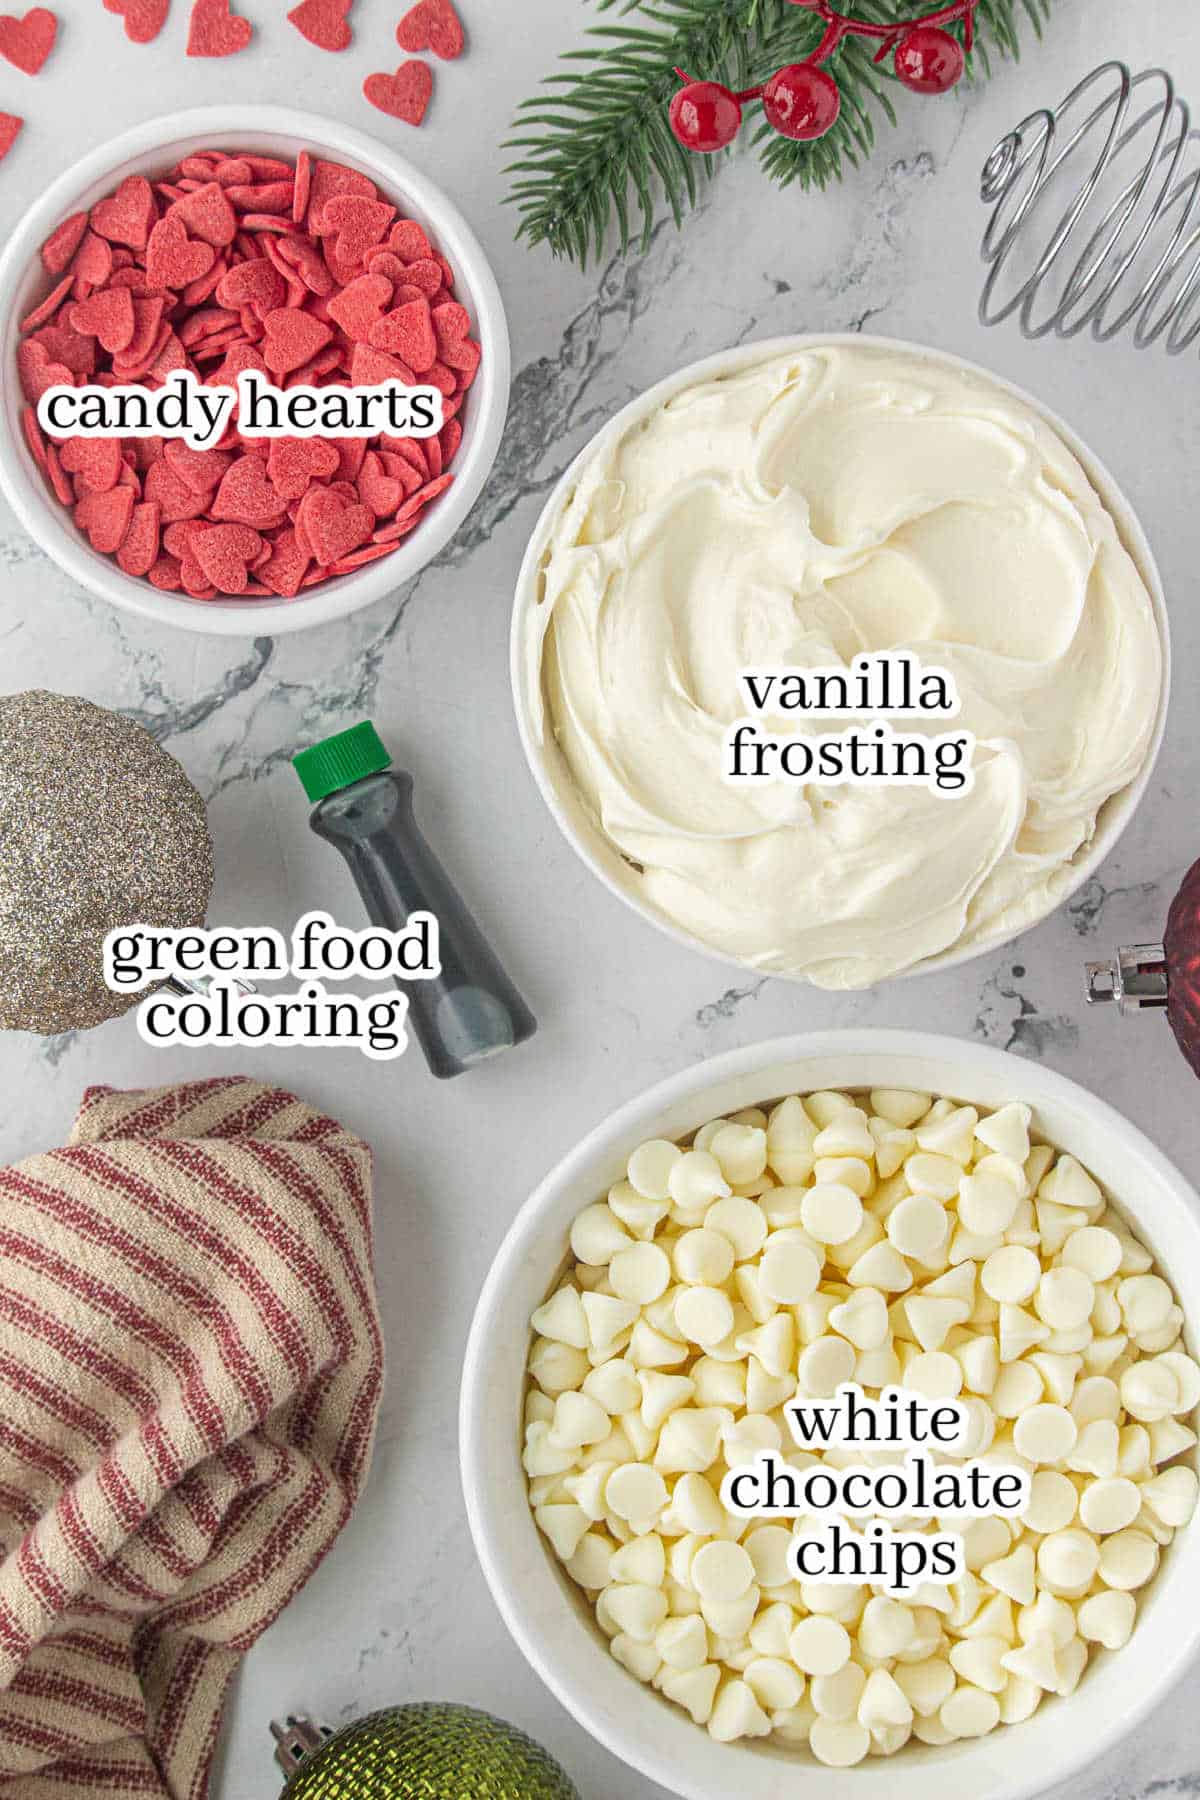 Ingredients to make the candy recipe. With print overlay.